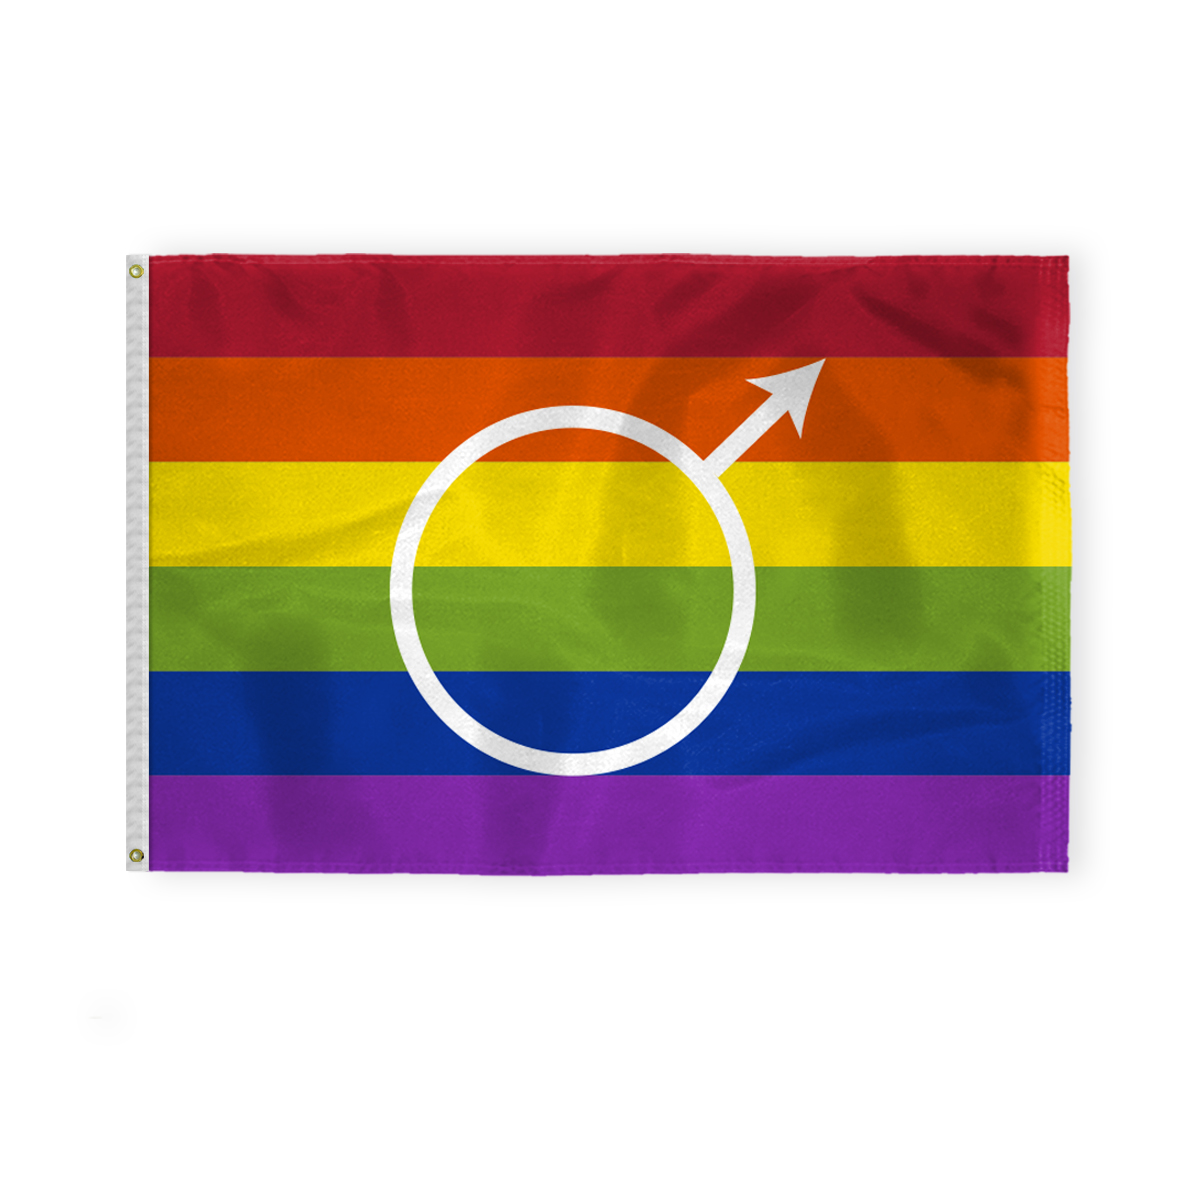 AGAS Gay Male Pride Flag 4x6 Ft - Double Sided Printed 200D Nylon